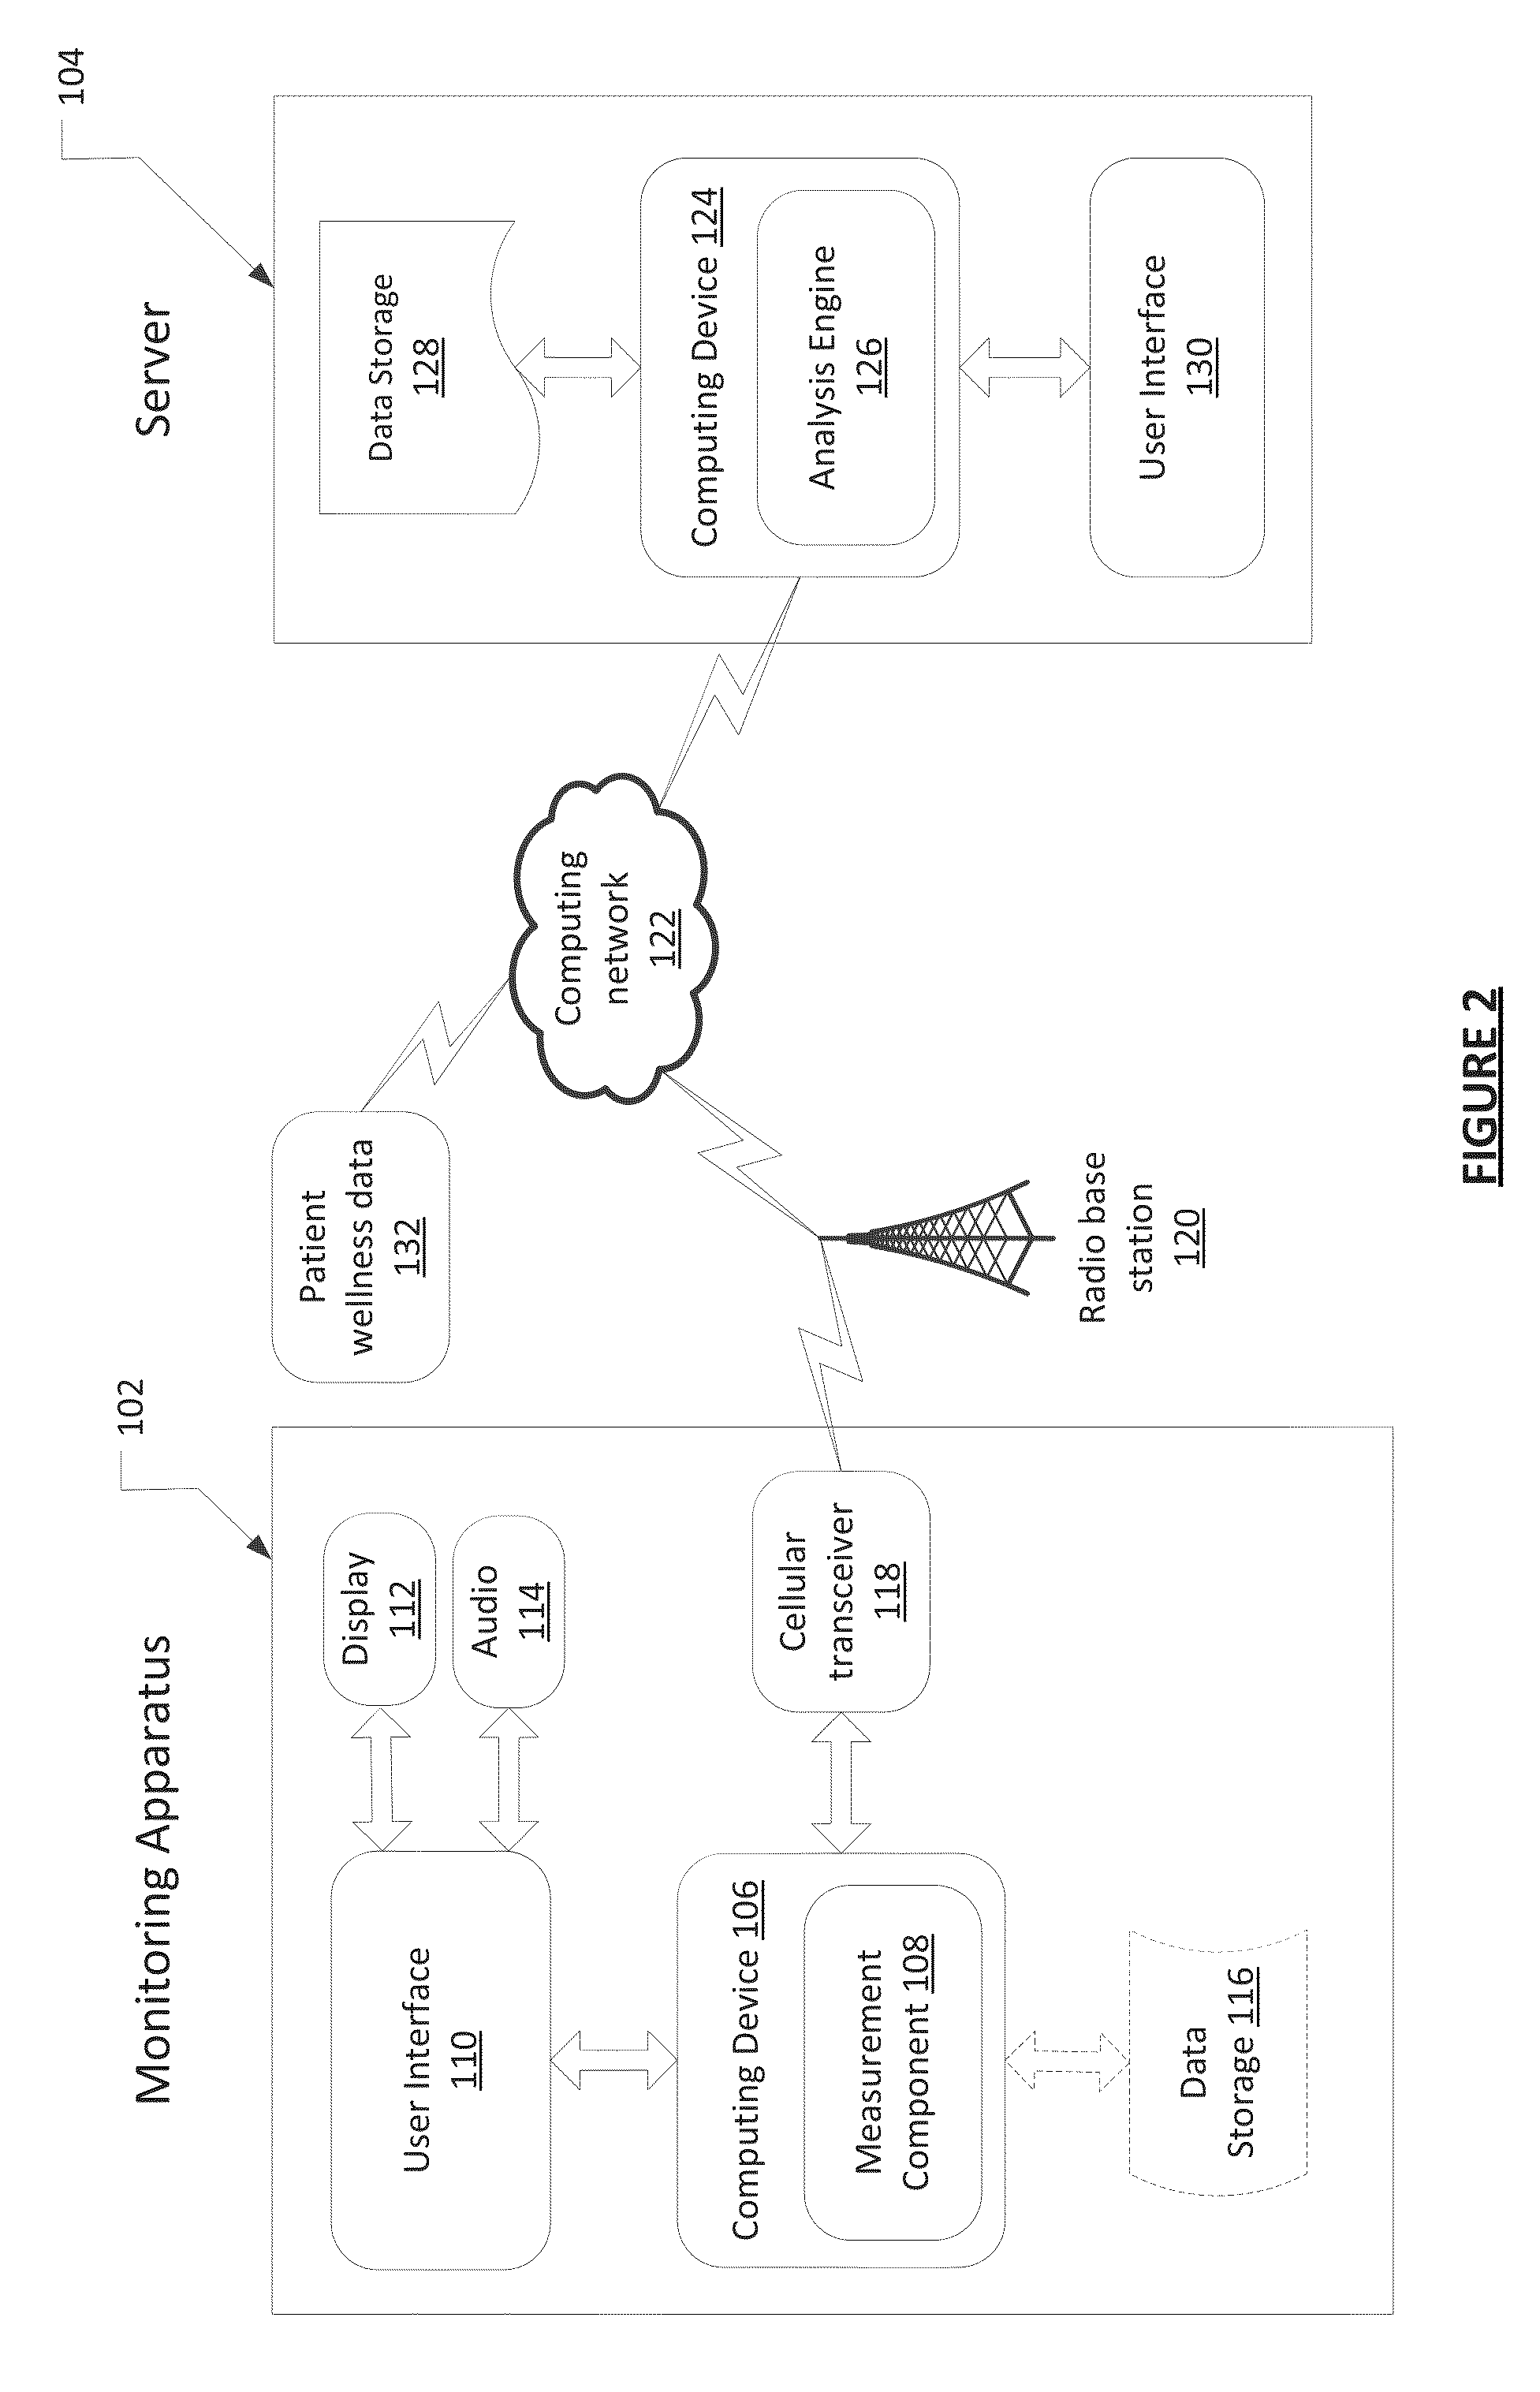 Health-monitoring system with multiple health monitoring devices, interactive voice recognition, and mobile interfaces for data collection and transmission